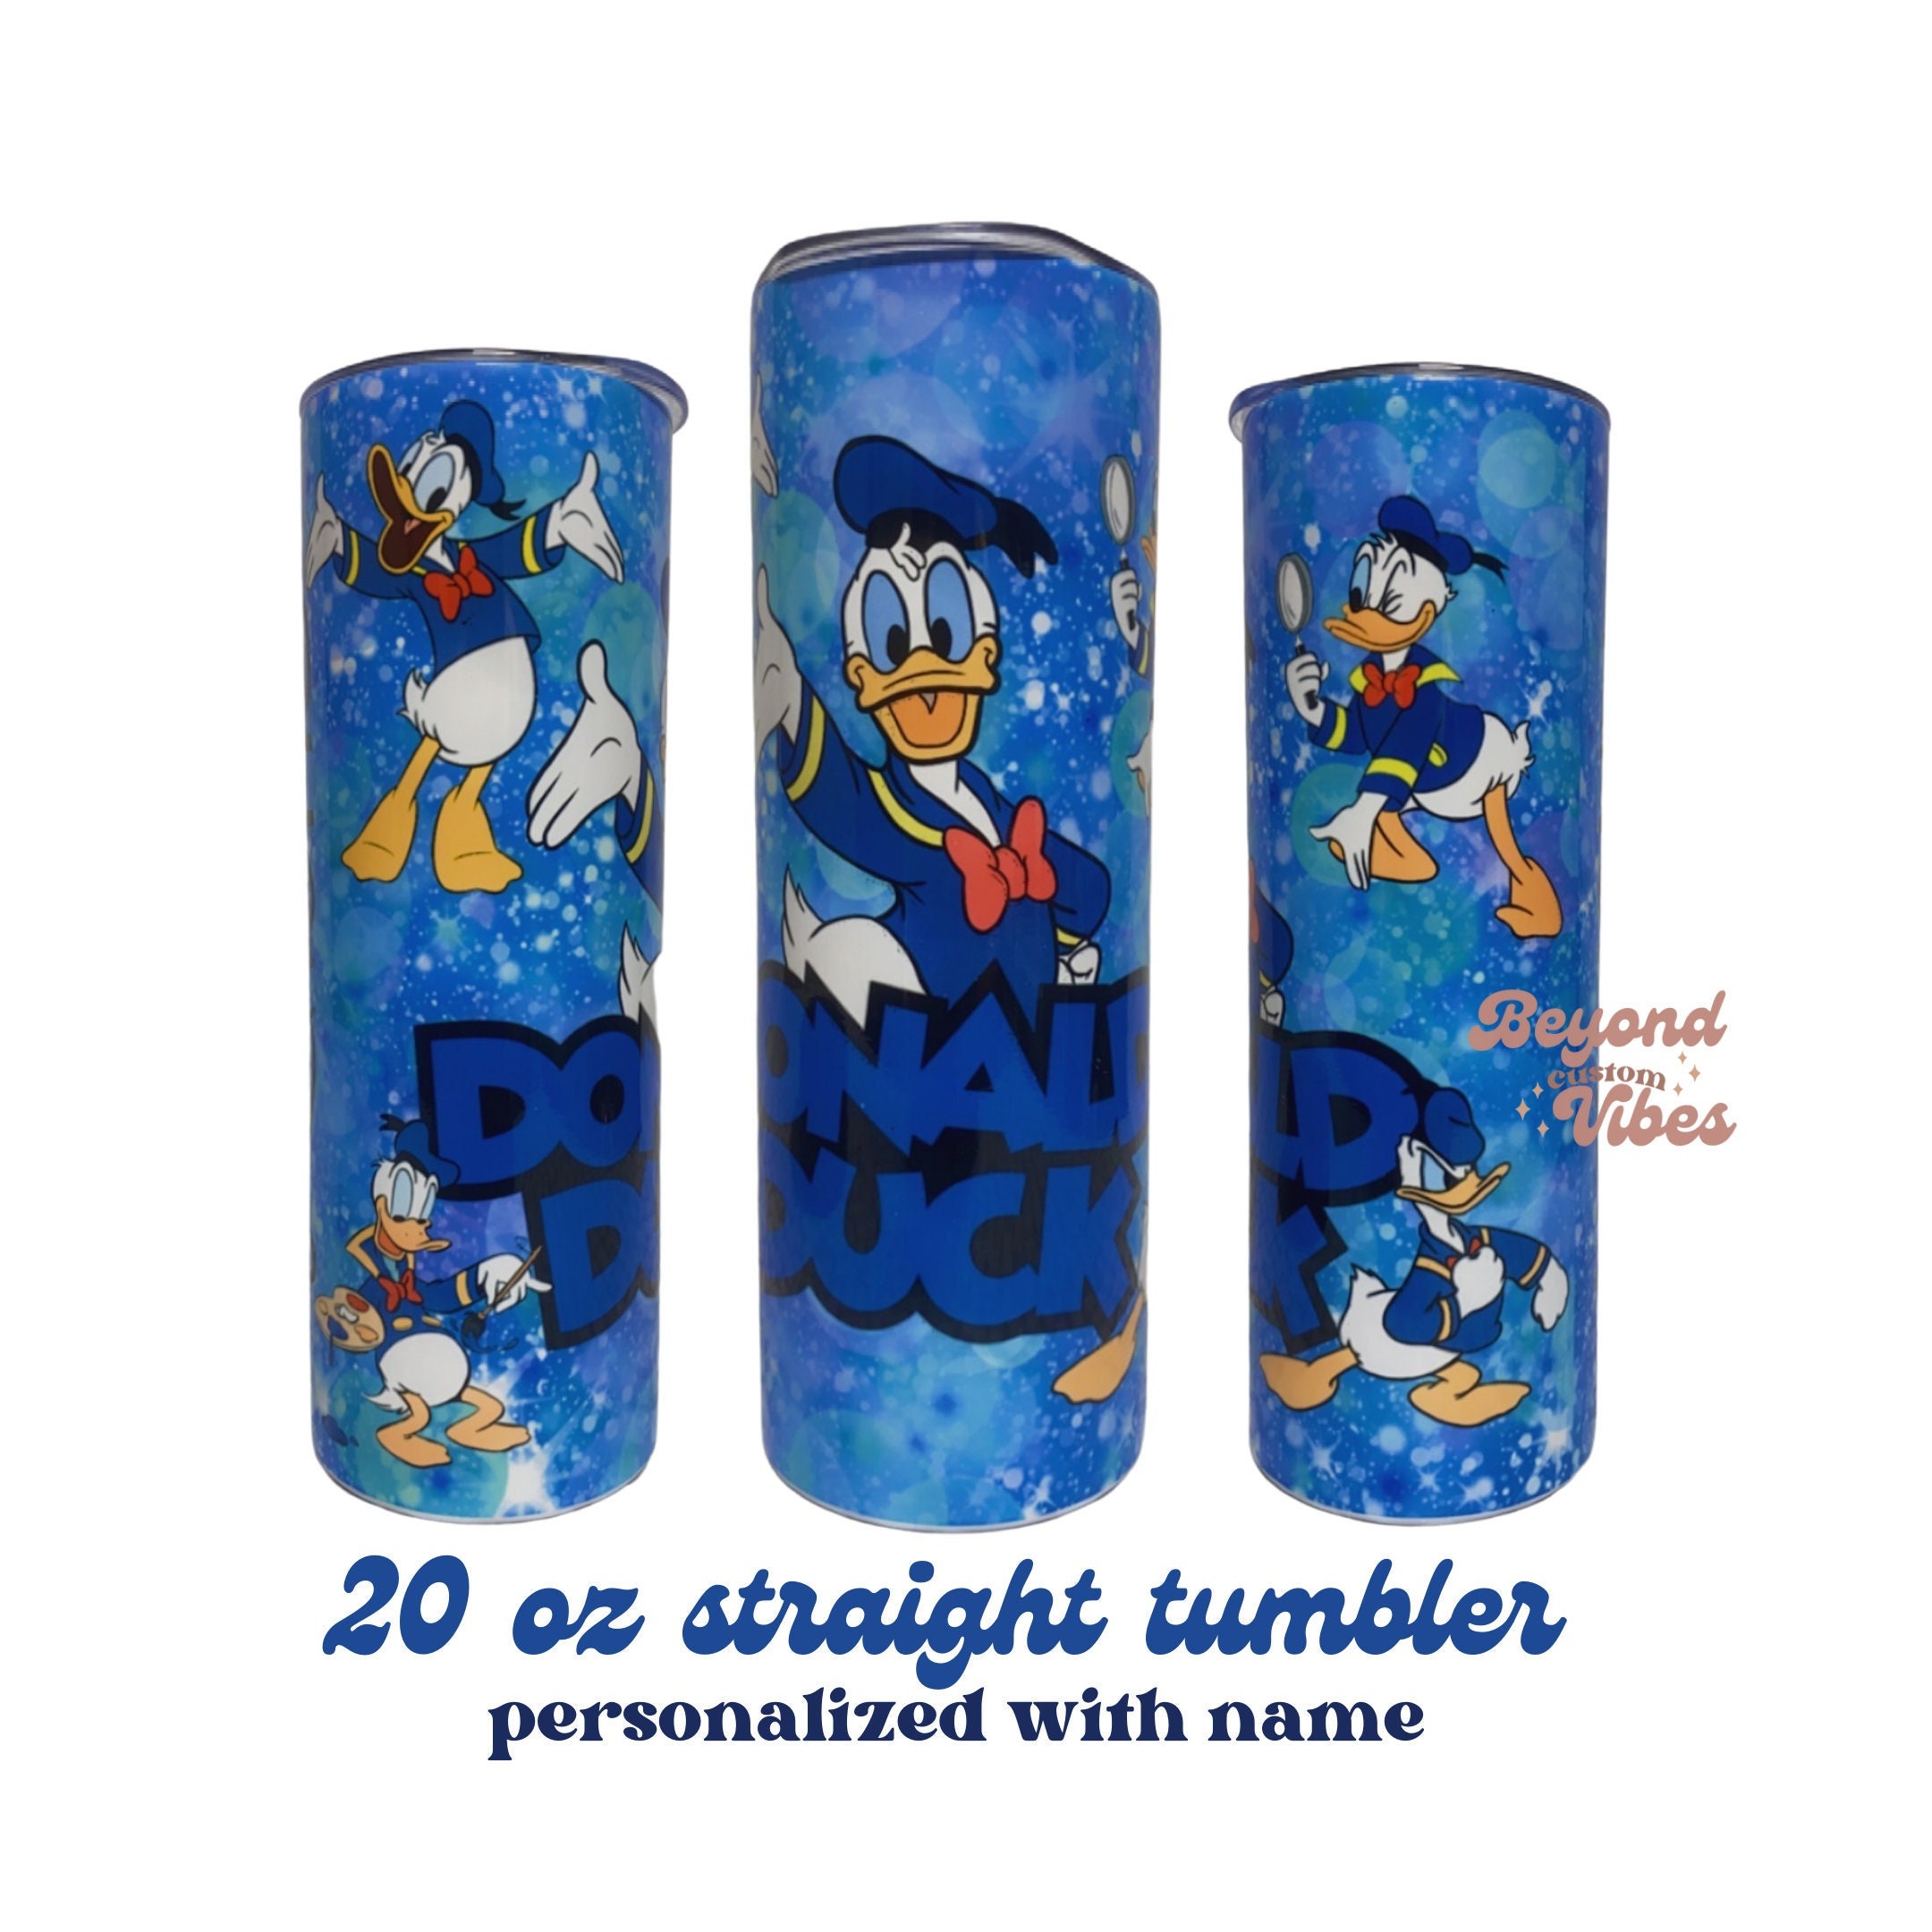 Everyday Delights Disney Donald Duck ABS Stainless Steel Cup with Lid,  250ml, Blue